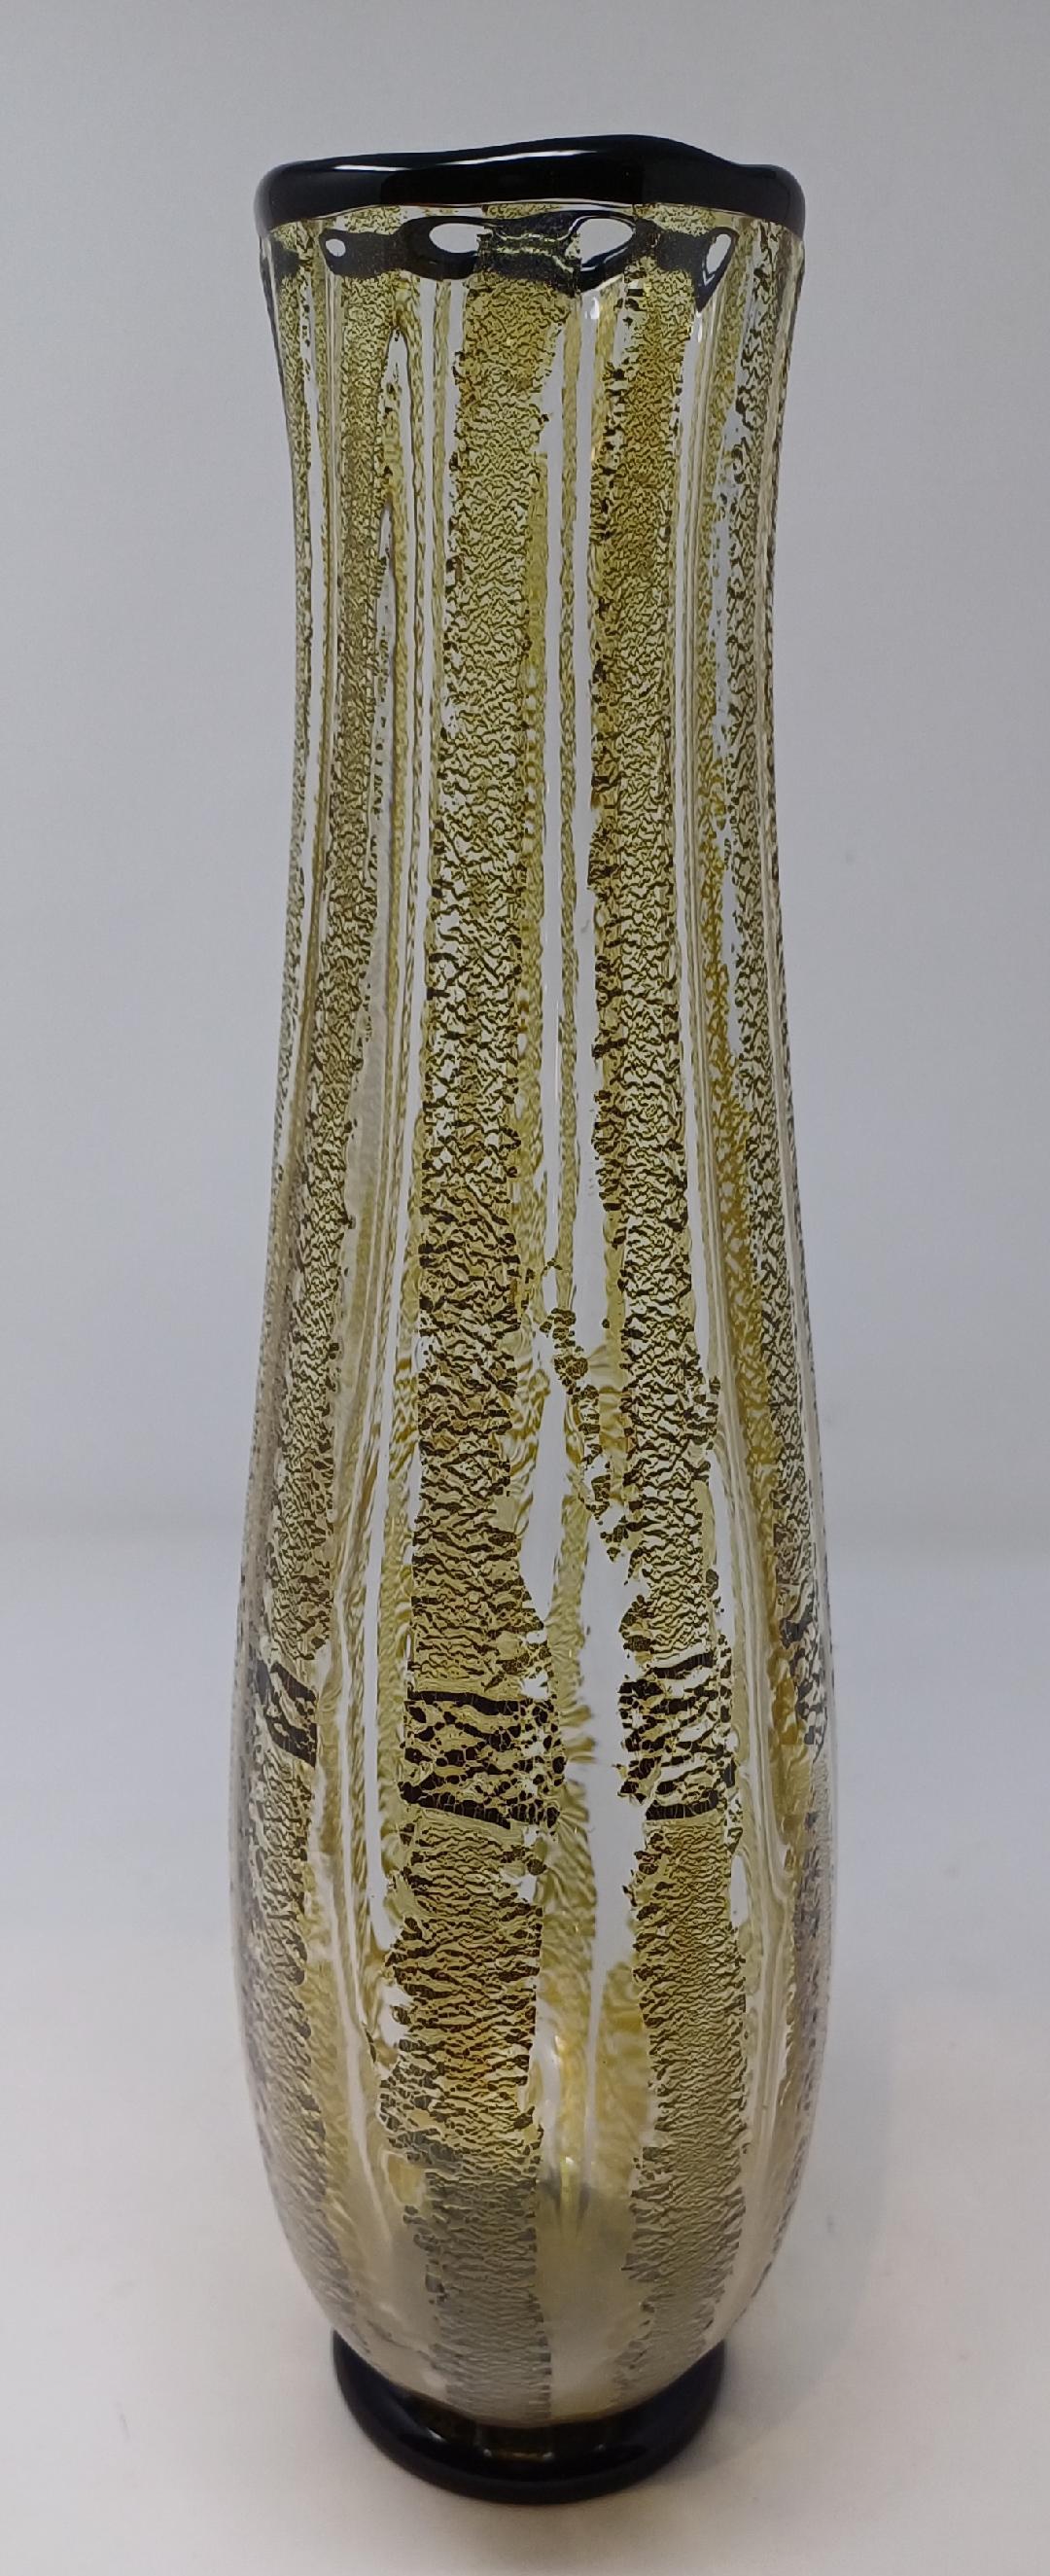 Vase decorated with gold leaf and powder, made by Seguso Viro in 1999. Signed at the base.